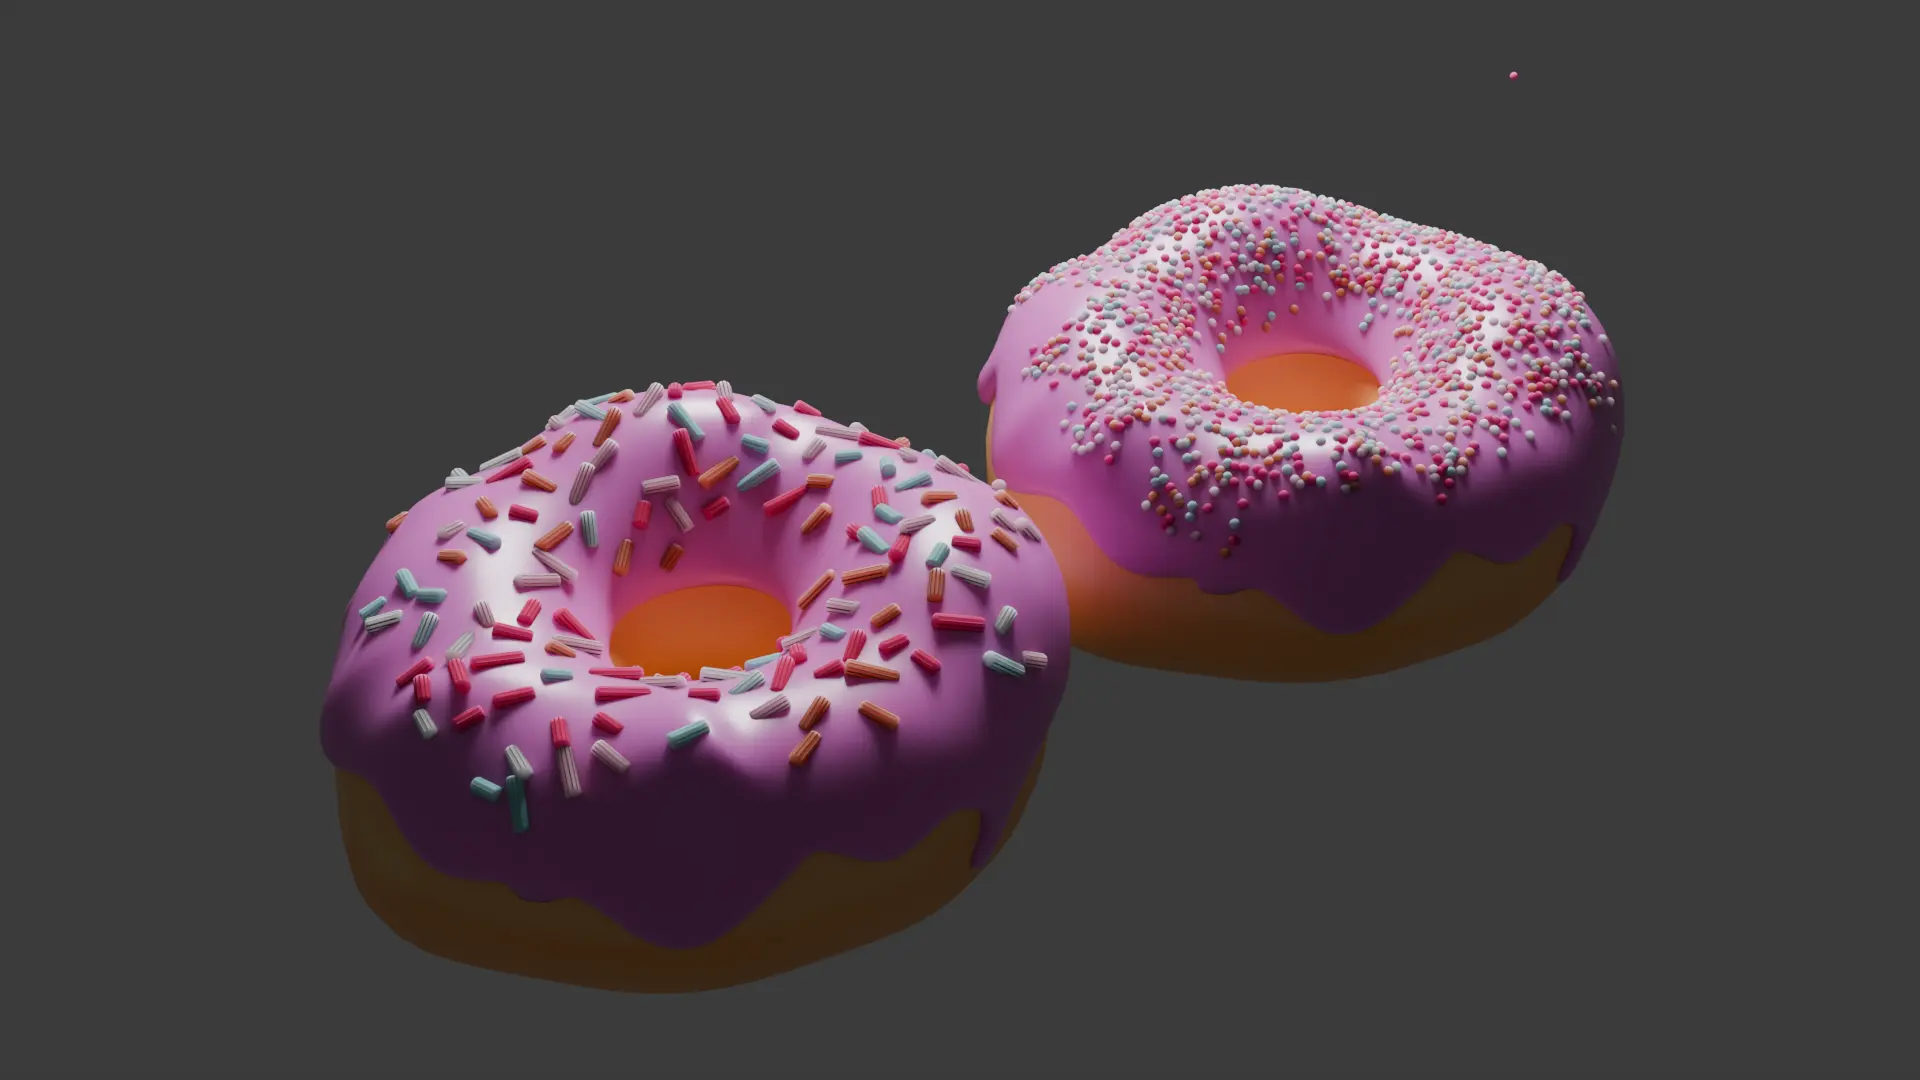 Render of two donuts. Both donuts are next to each other and have a pink colored icing on top. One of the donuts have a long sprinkles while the other one has round multicolored sprinkles